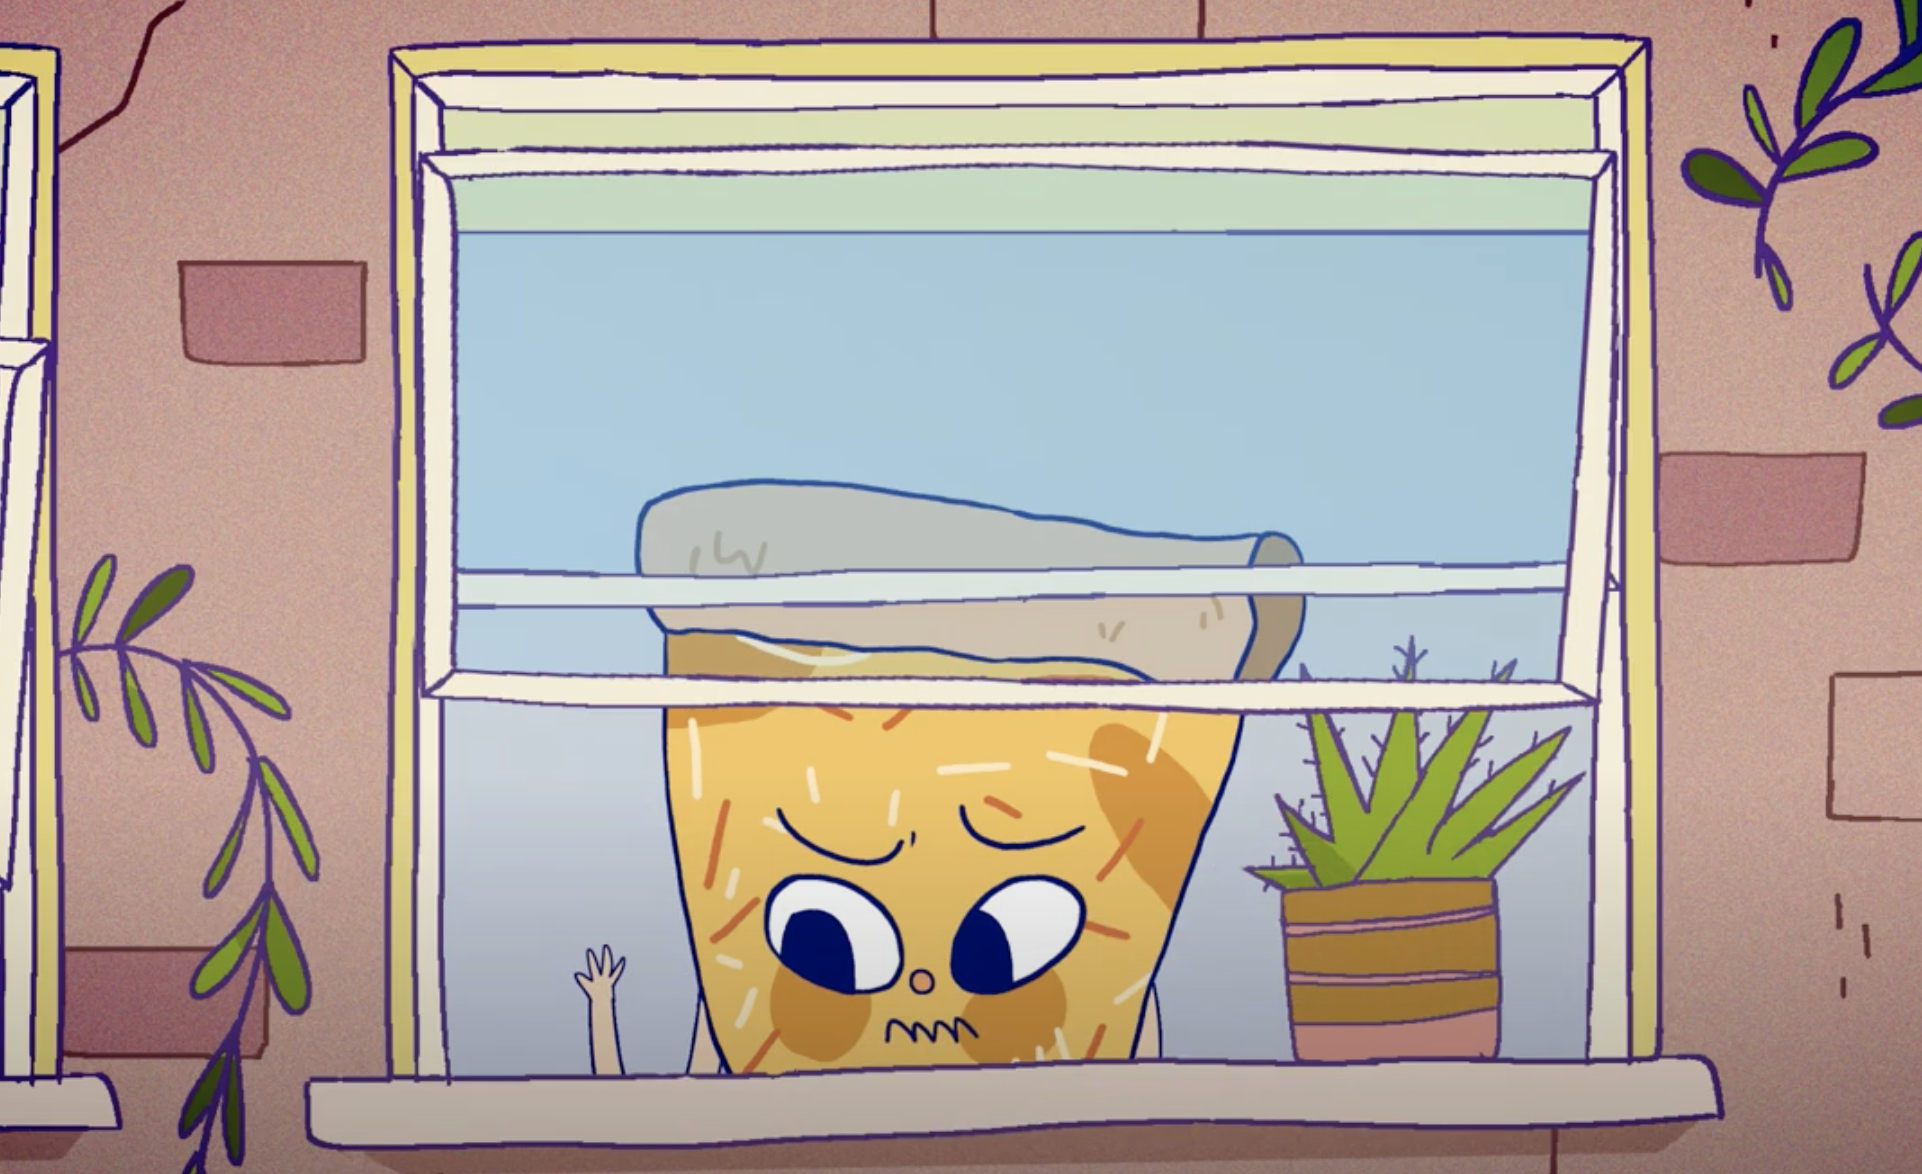 Caretoons animated series about anxiety for kids